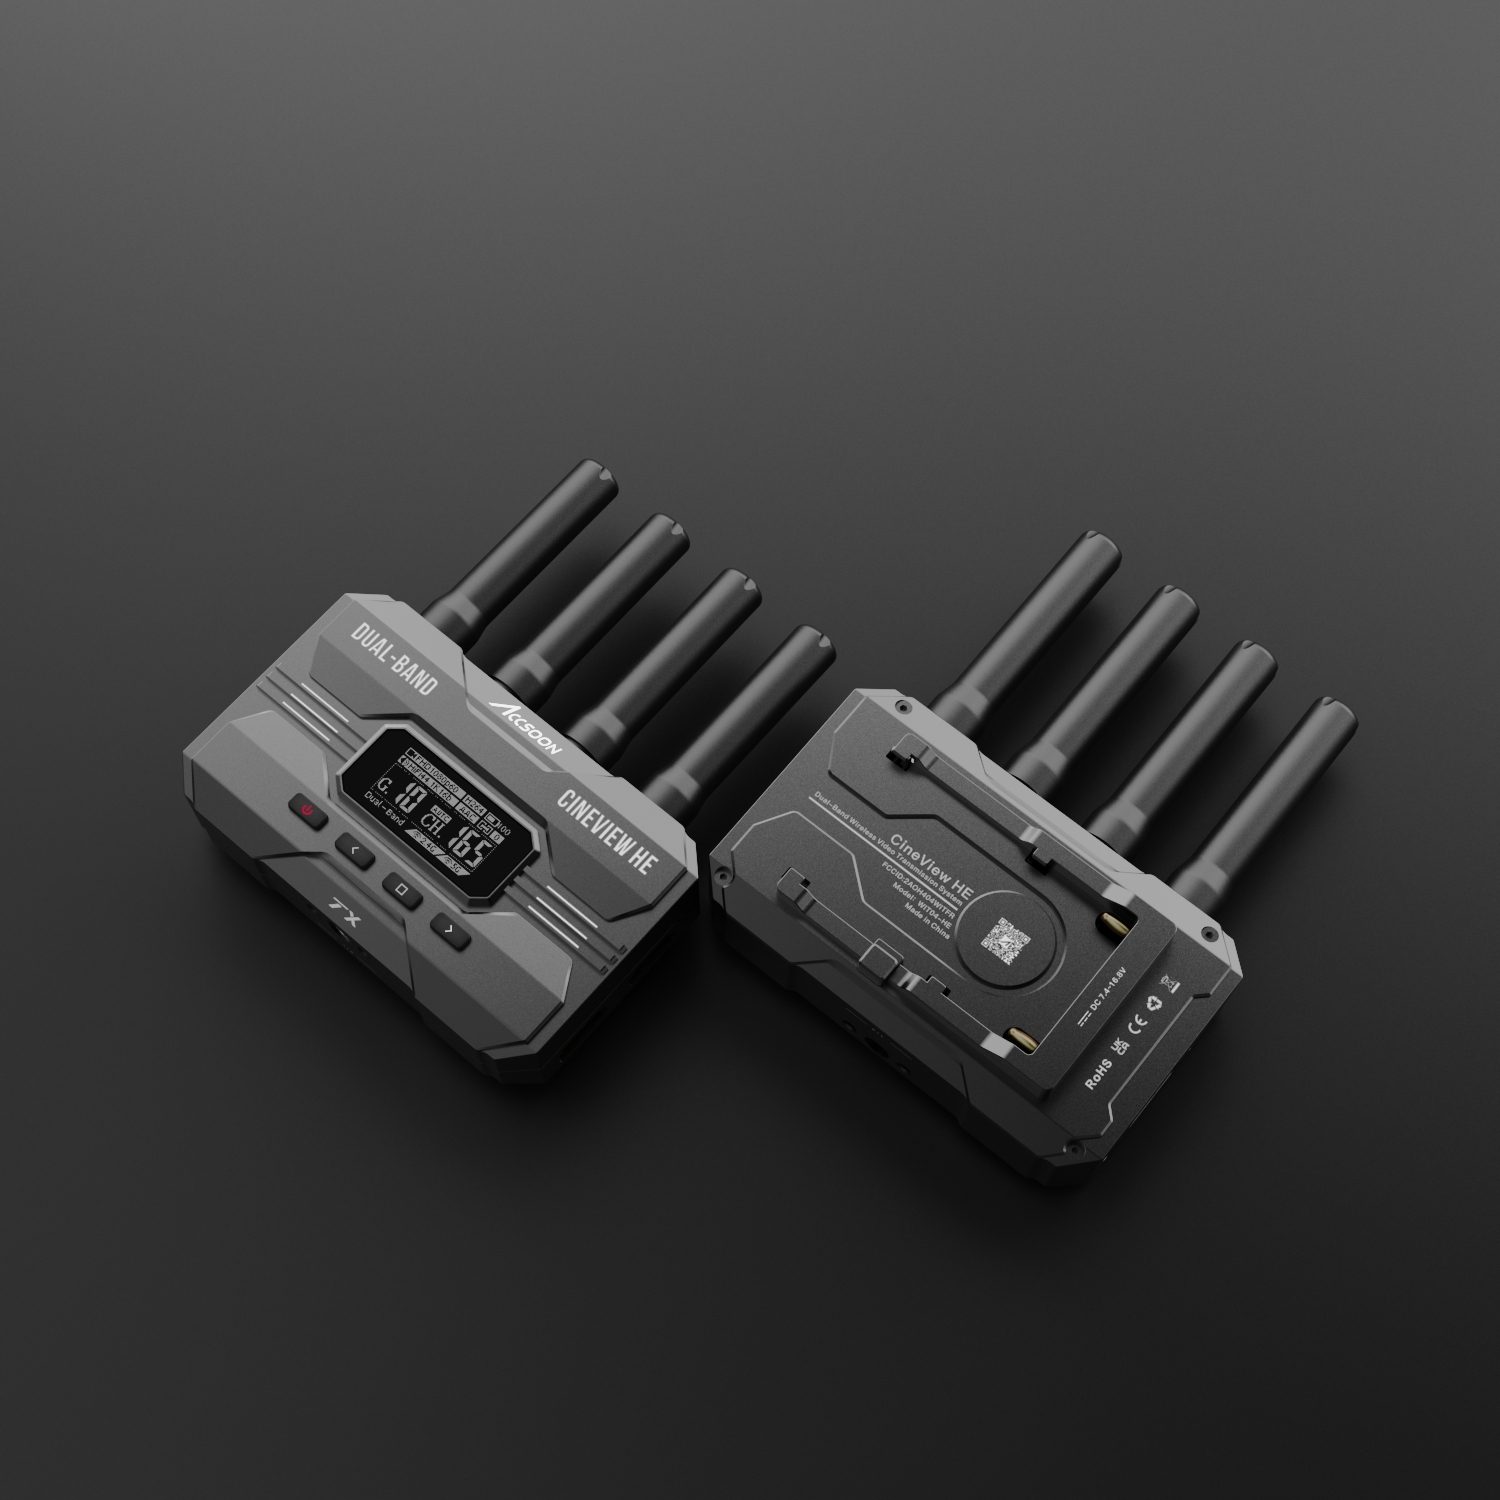 Accsoon CineView HE - Transmitter & Receiver